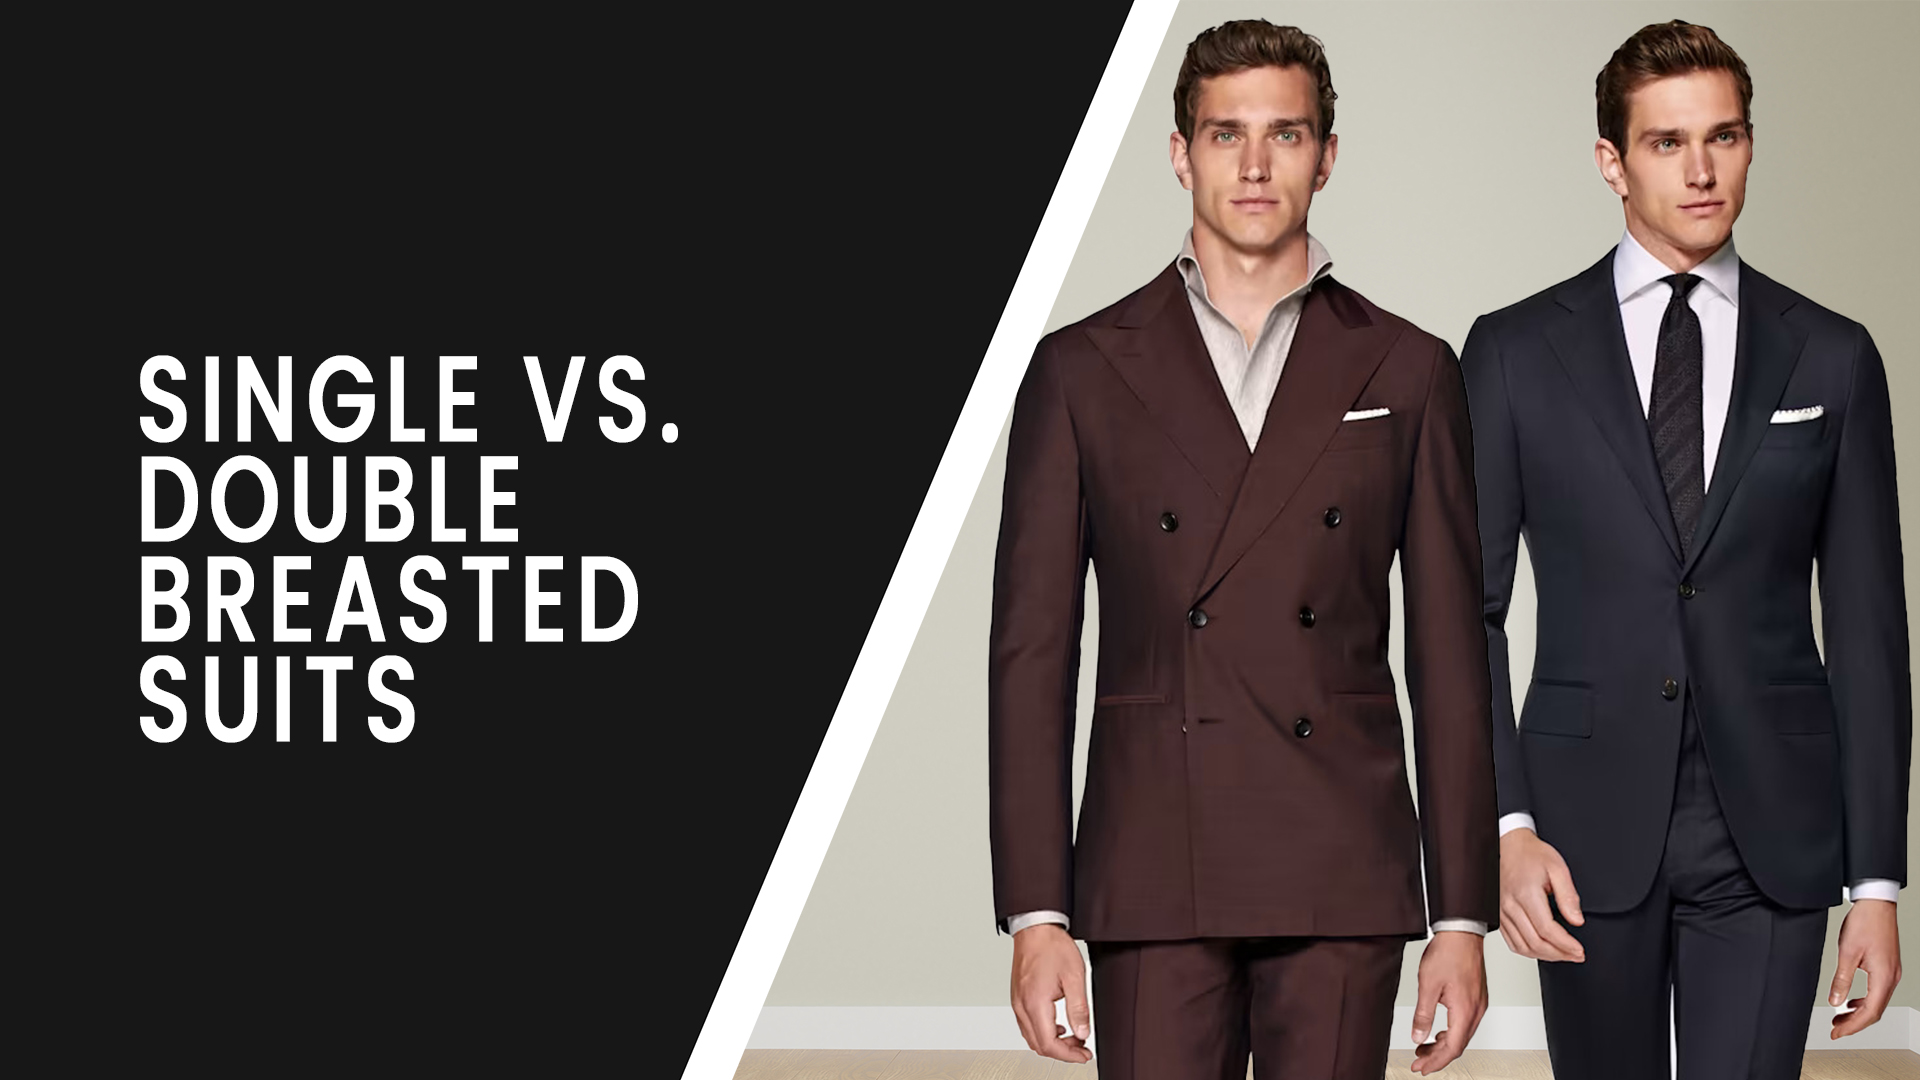 Endless Options To Personalize Your Custom Suit With, 48% OFF